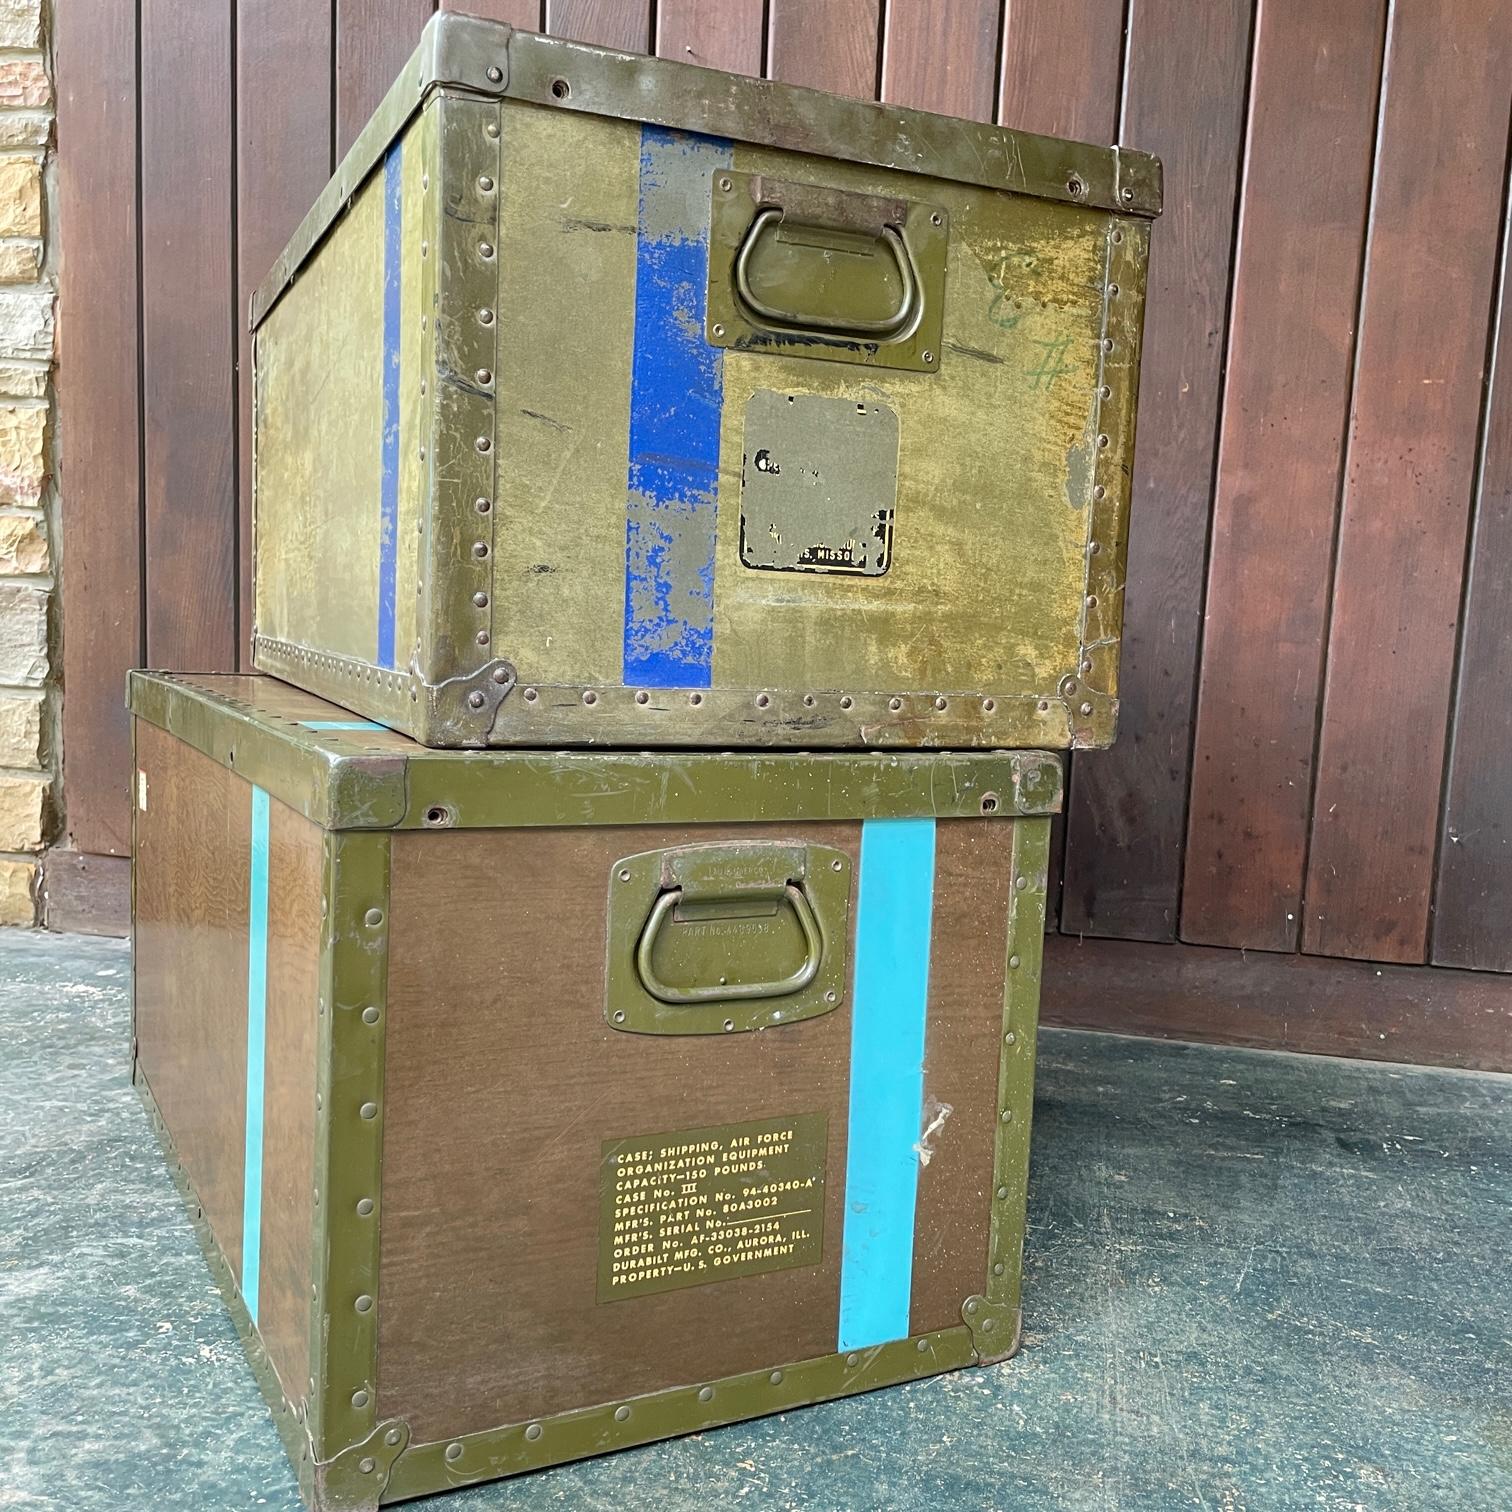 Sold separately so please specify which one you would like, the lighter more worn box or the darker less worn one.
These are both identical vulcanized fiber cartage trunks with brass or steel  cornering/edging.  The top lid comes off, and there are